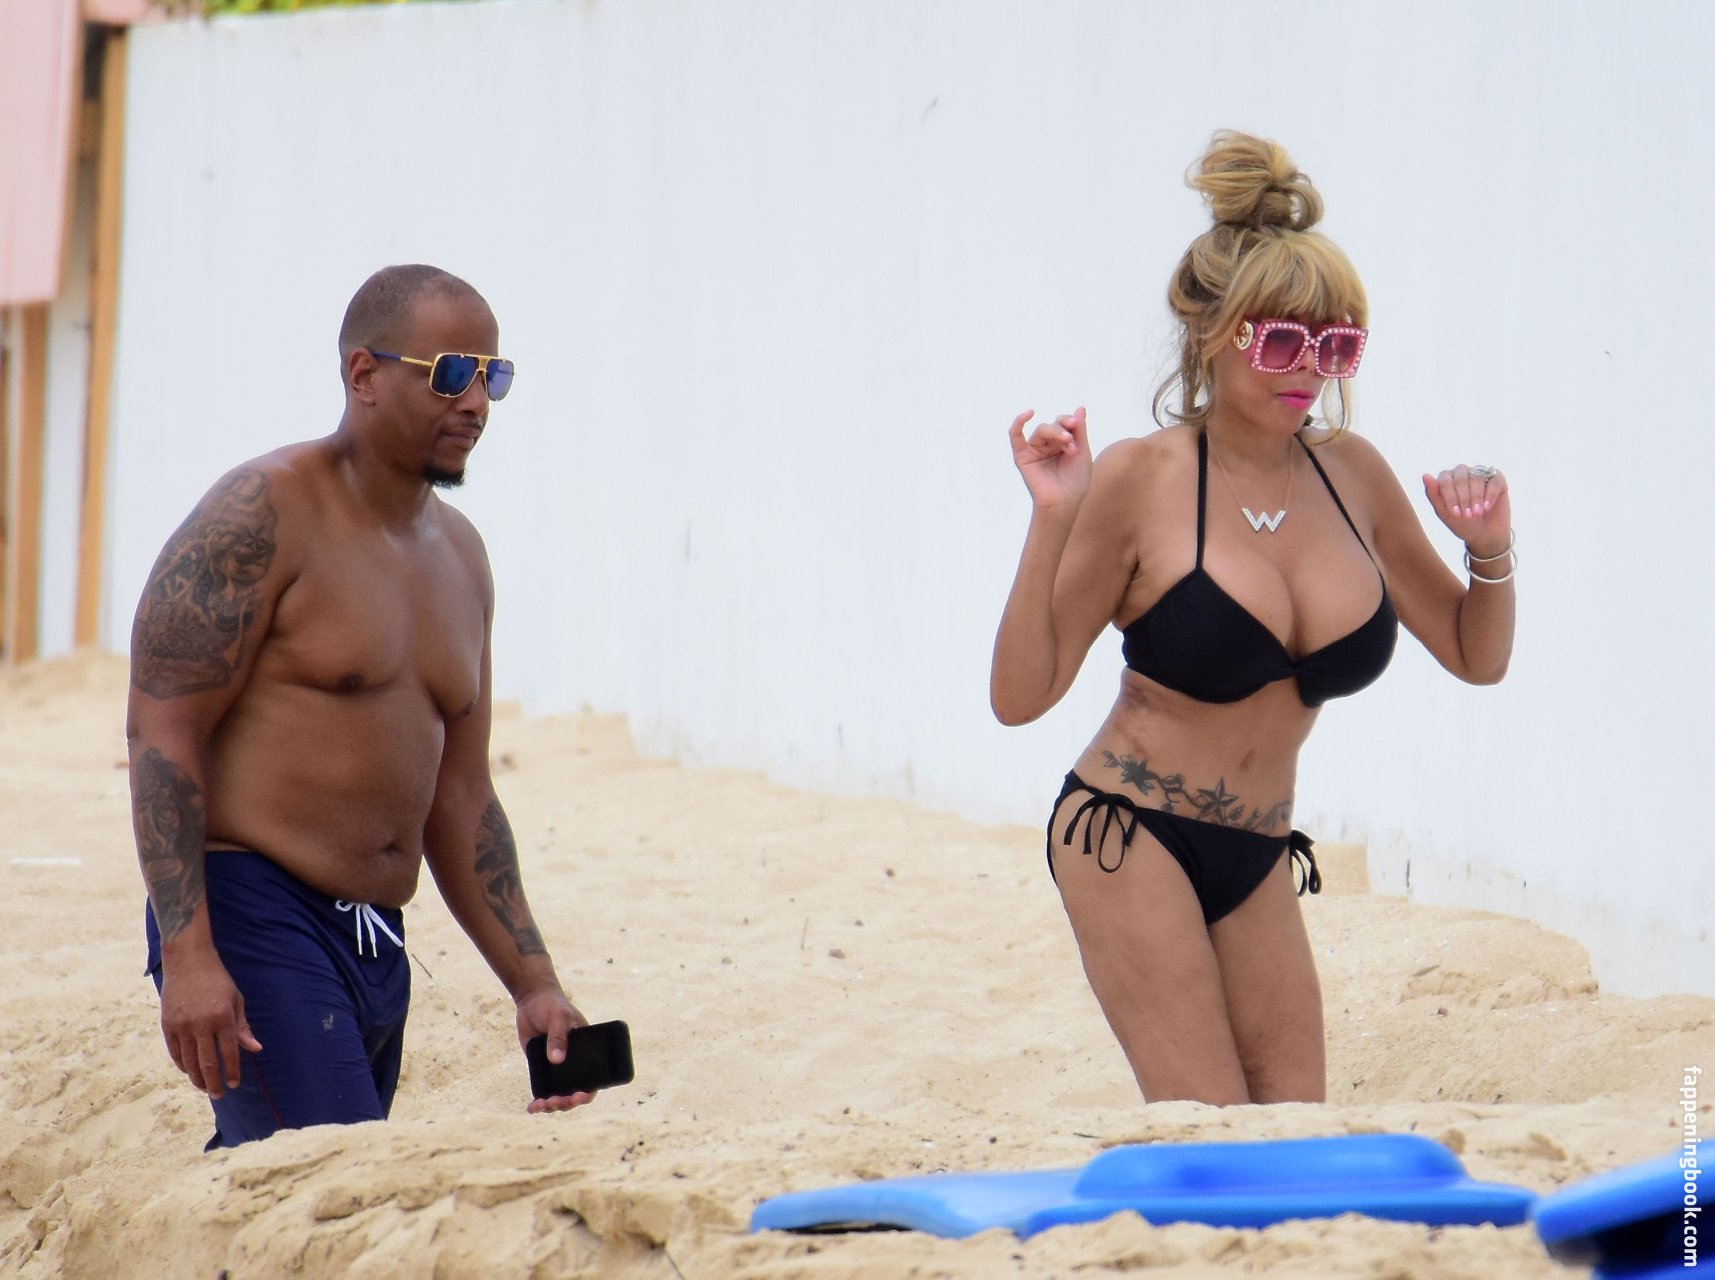 Topless wendy williams Wanna See